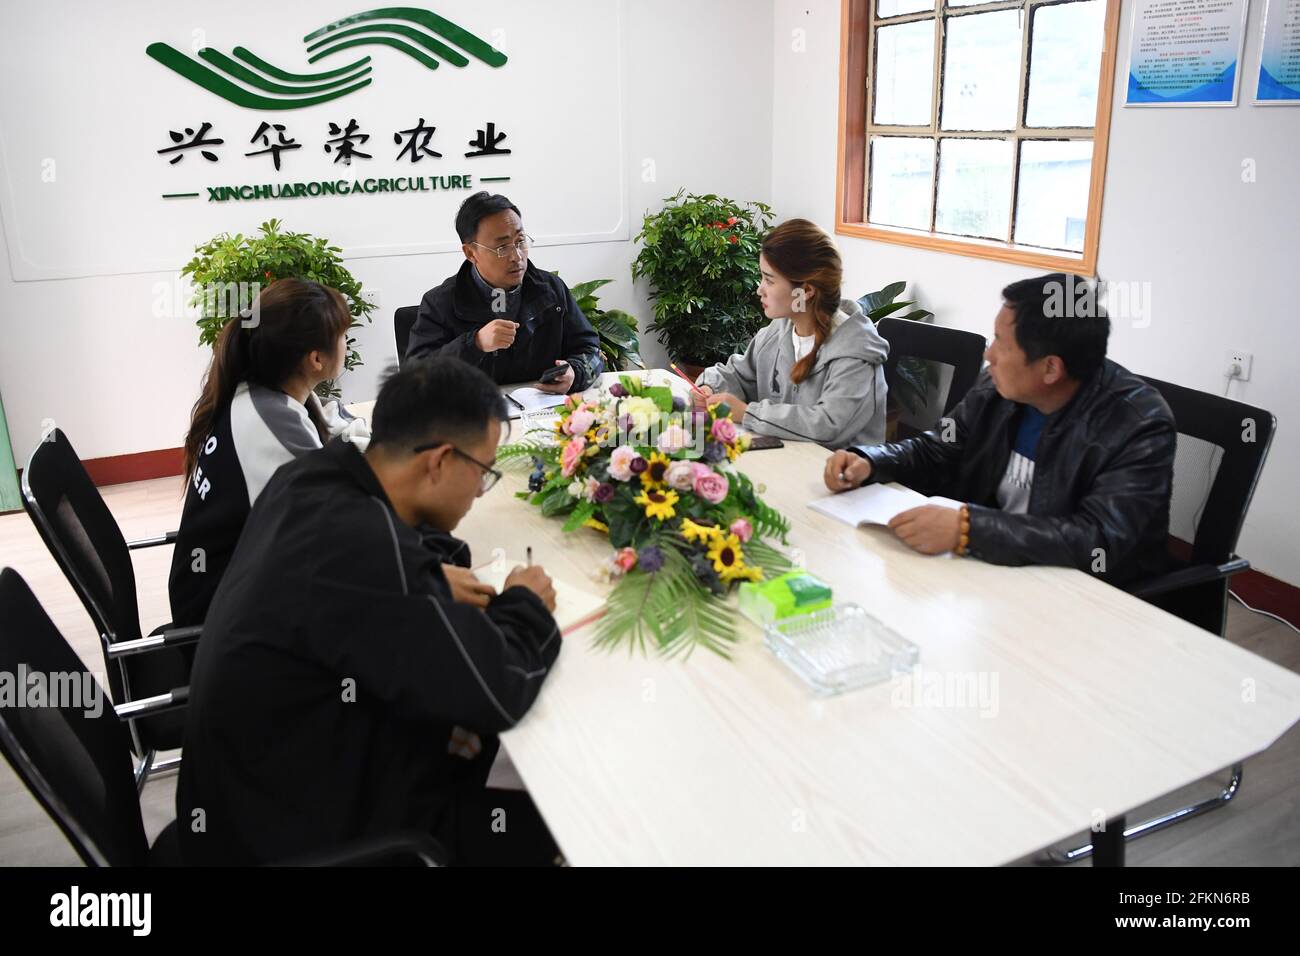 (210503) -- TIANSHUI, May 3, 2021 (Xinhua) -- Zhang Shuhao hosts a meeting with other members of his team at Xinghuarong, an agriculture company in Mudan Township, Tianshui City of northwest China's Gansu Province, on April 27, 2021. Zhang Shuhao, 42, quit his well-paid job three years ago to start an agriculture company with a few partners sharing the same vision at a mountainous village in Mudan Township, Tianshui City. In three years, Xinghuarong, Zhang's company, contracted 6,200 mu (about 413 hectares) of idle arable lands, where terraced fields, greenhouses, and a reservoir have been bu Stock Photo